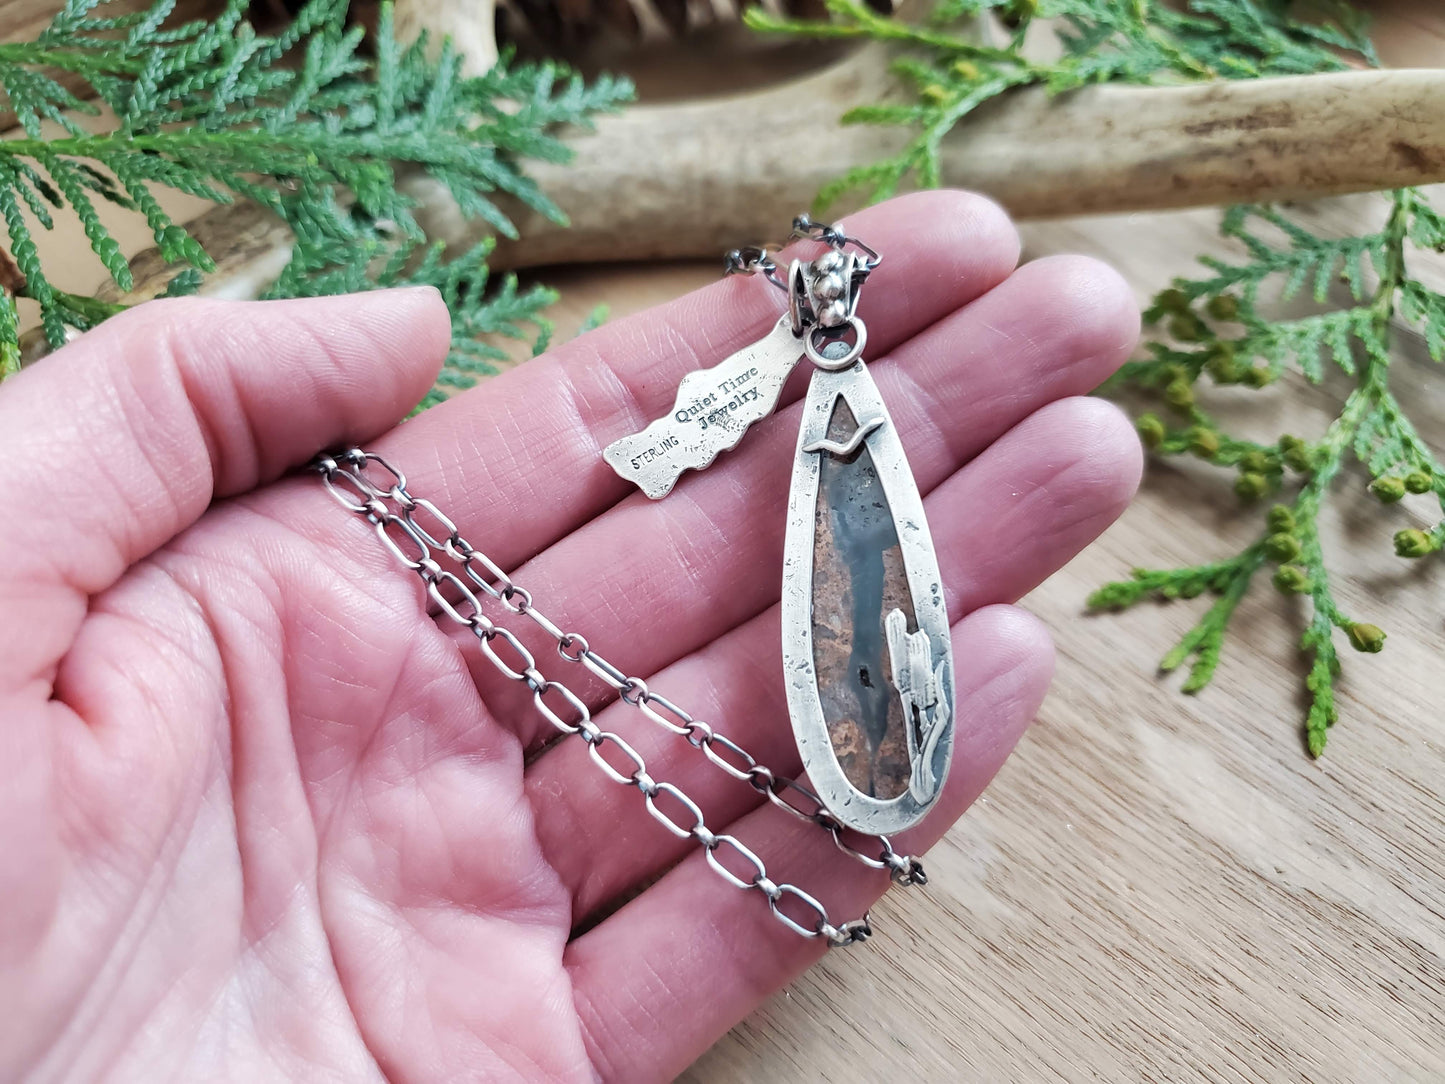 Needles Blue Agate and Trout Charm Necklace with River Rock Detailing